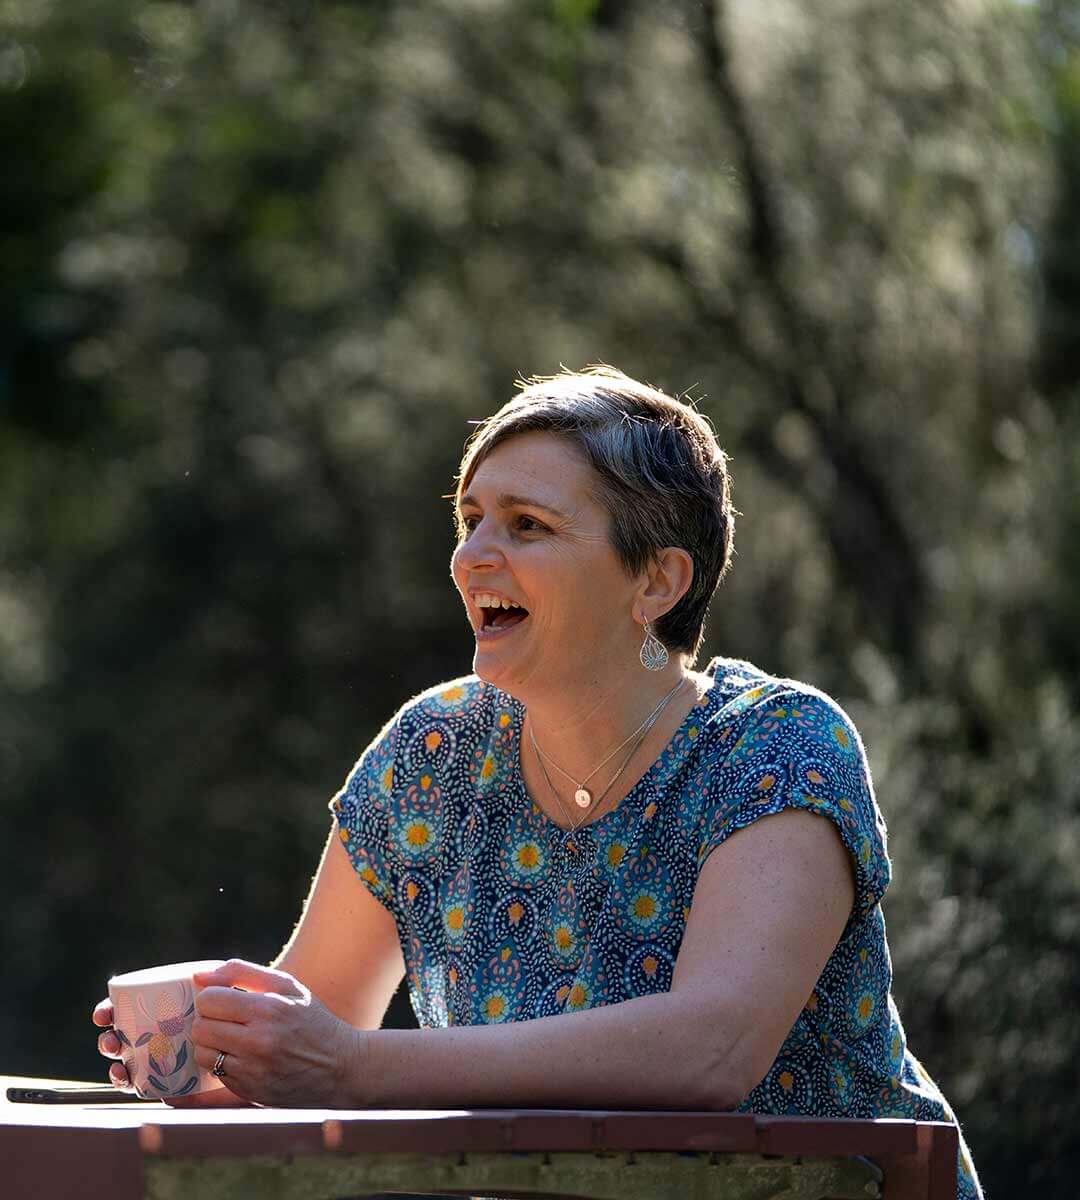 Mandy Mercuri, owner and mindfulness coach, laughing at a bench outside in the sun.